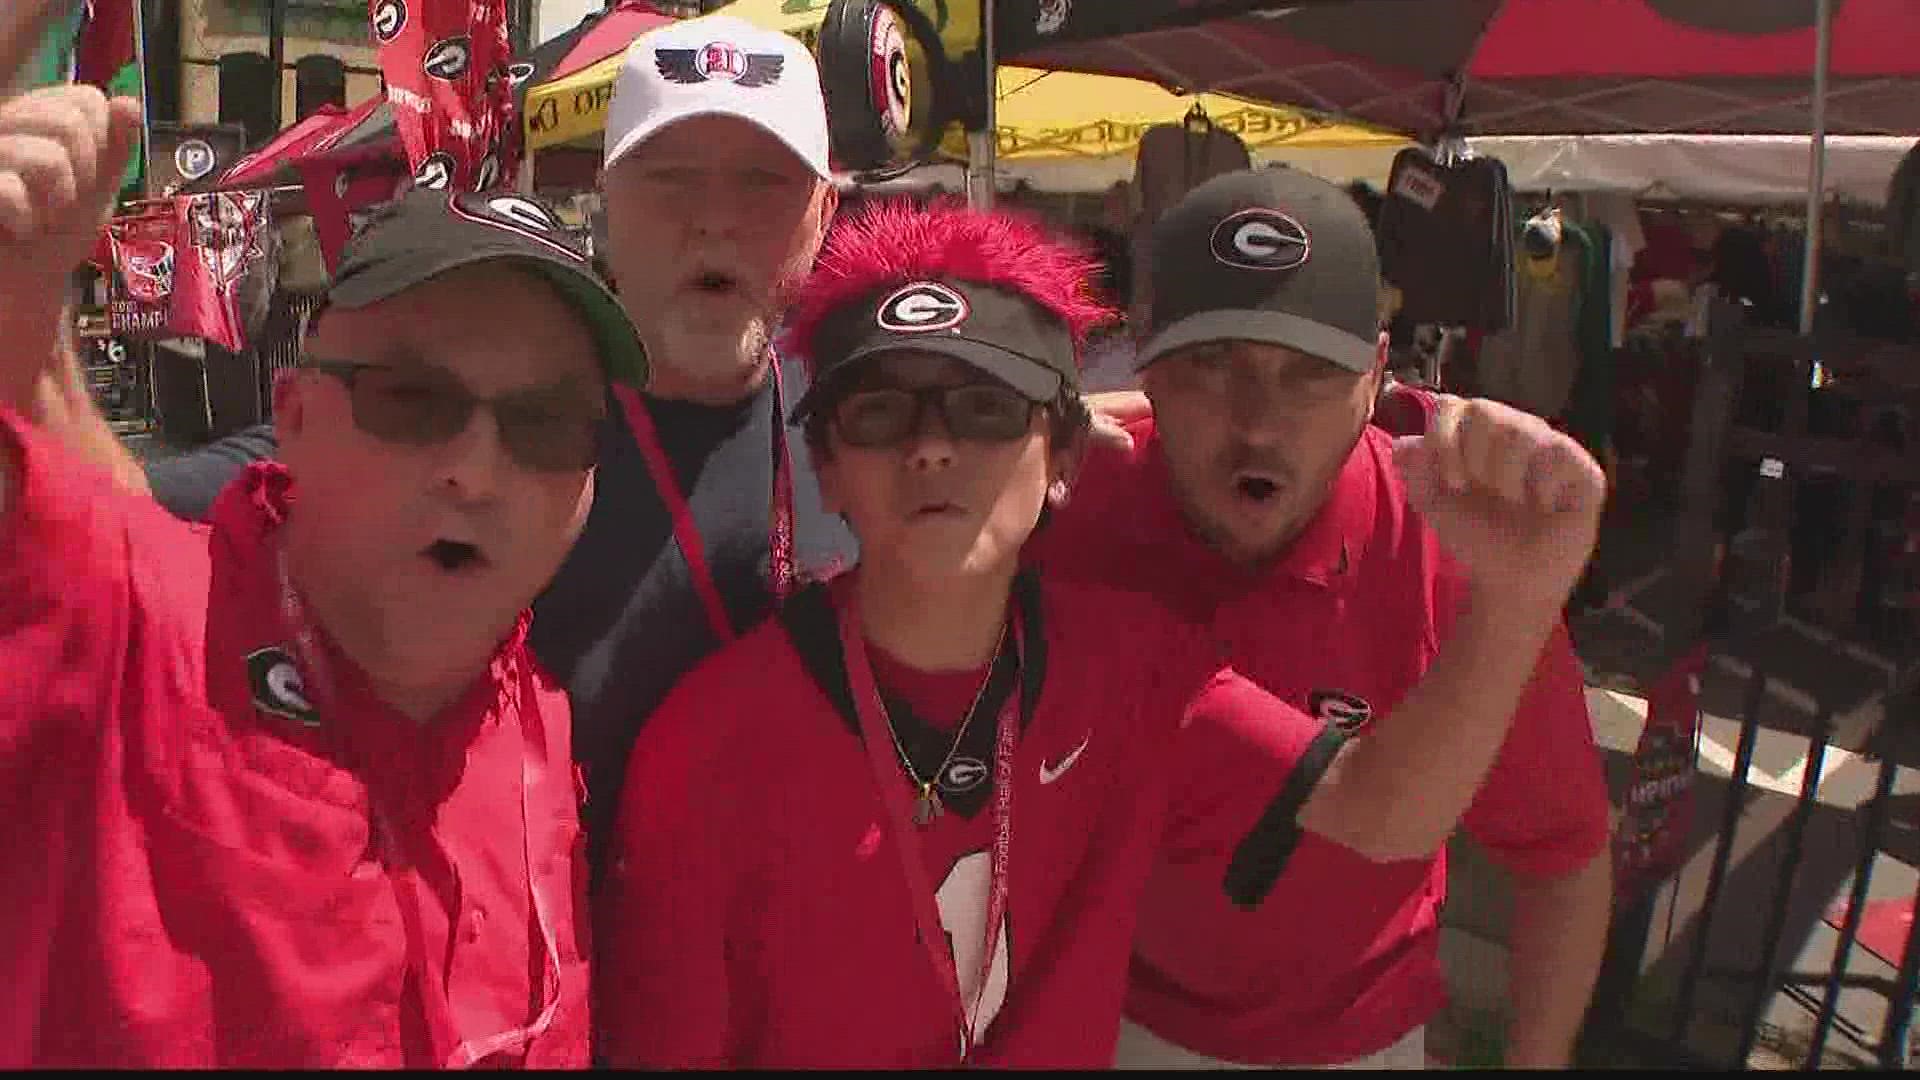 Comic book enthusiasts, UGA fans and people celebrating love will bring big crowds.